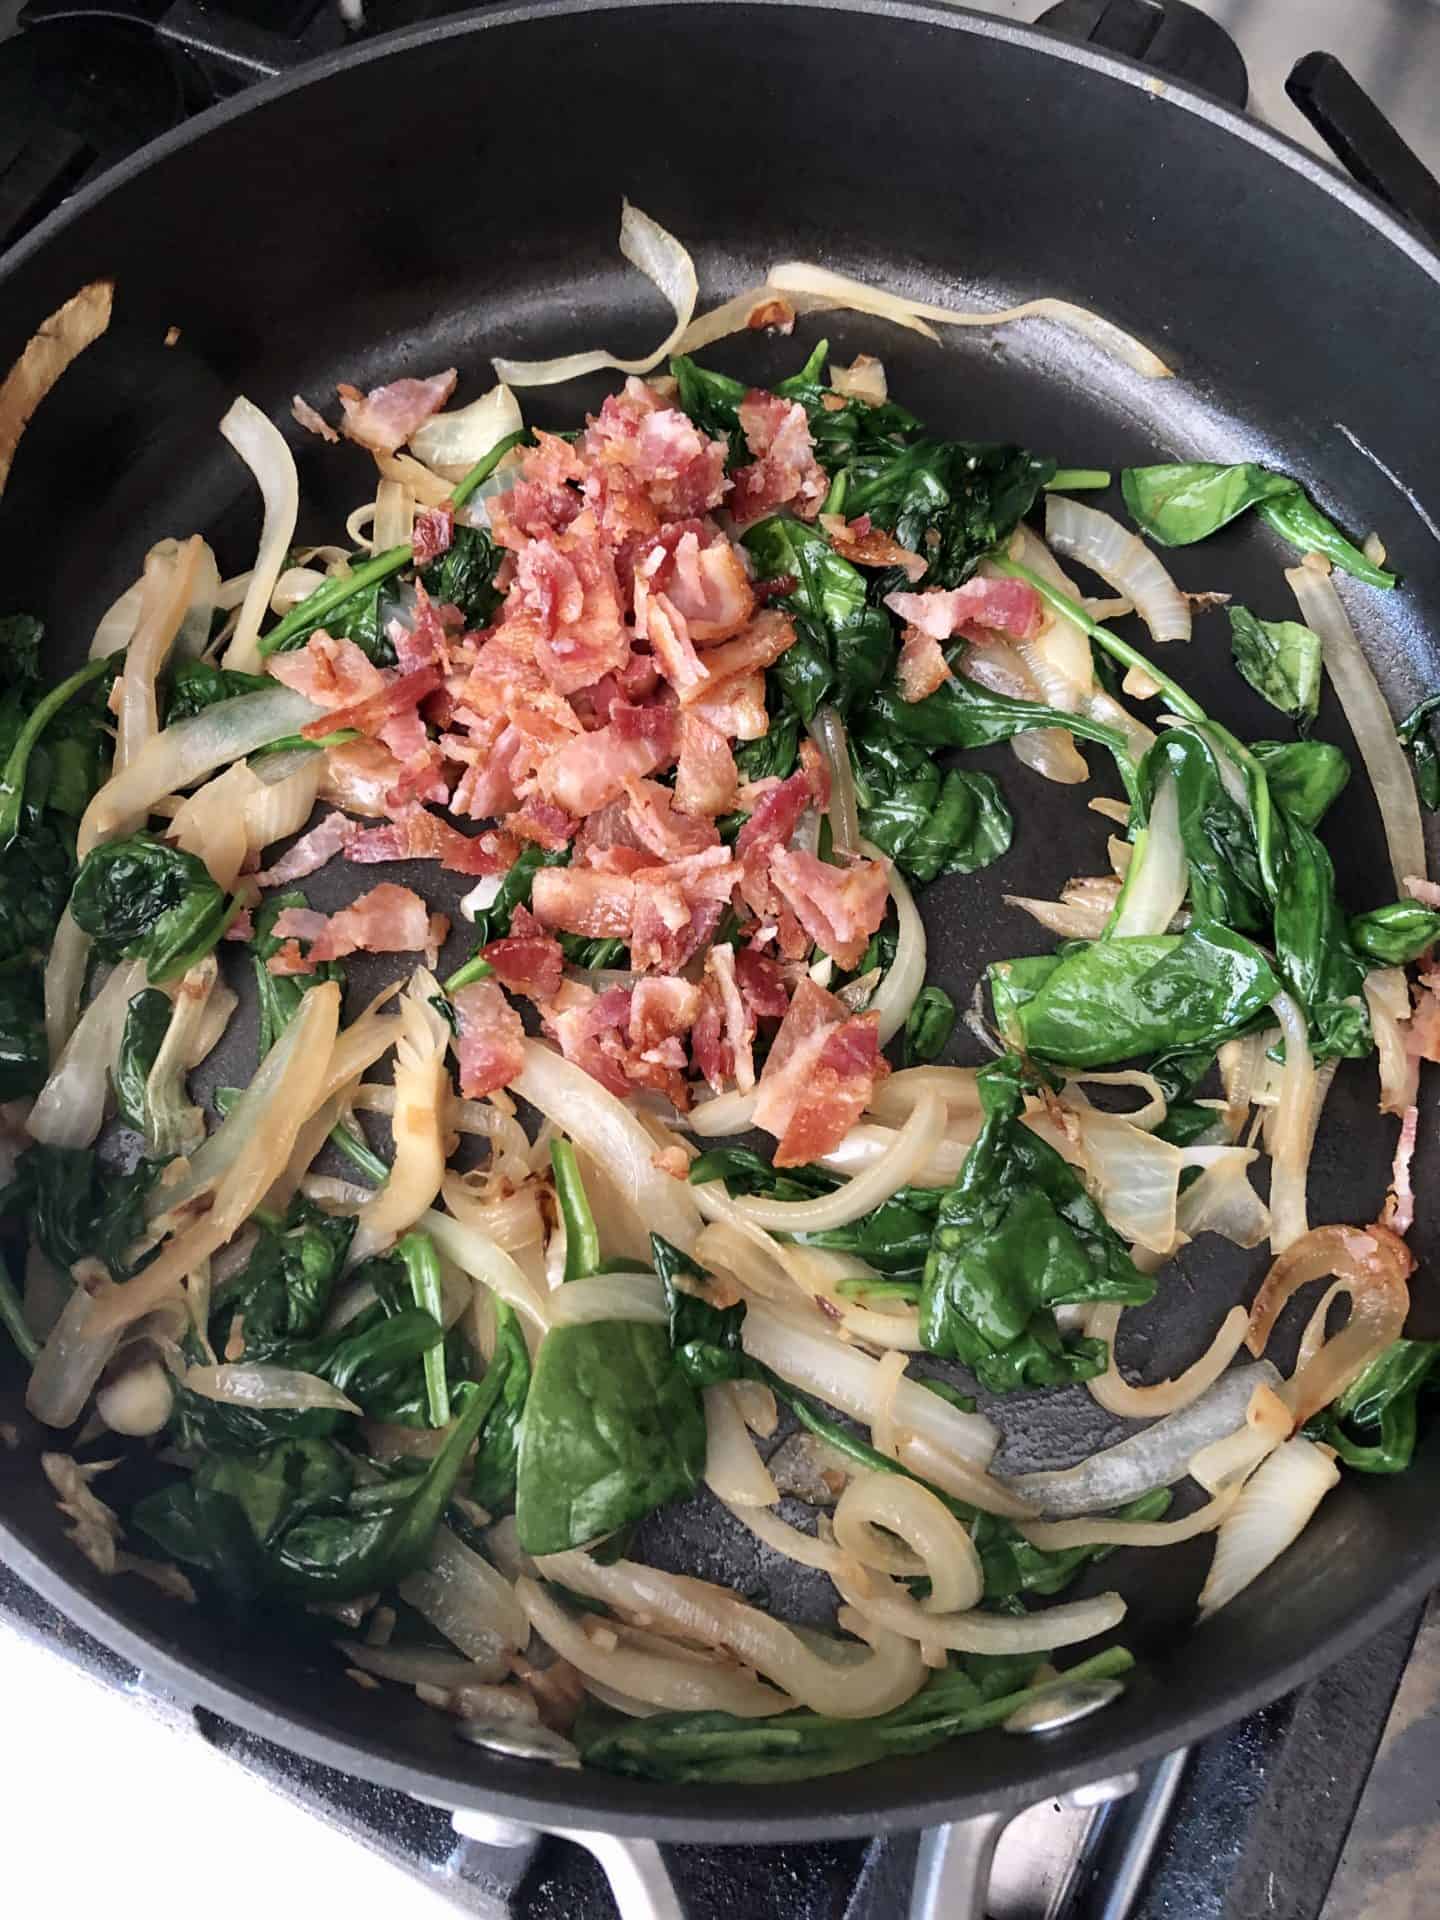 Bacon added to cooked spinach and onions